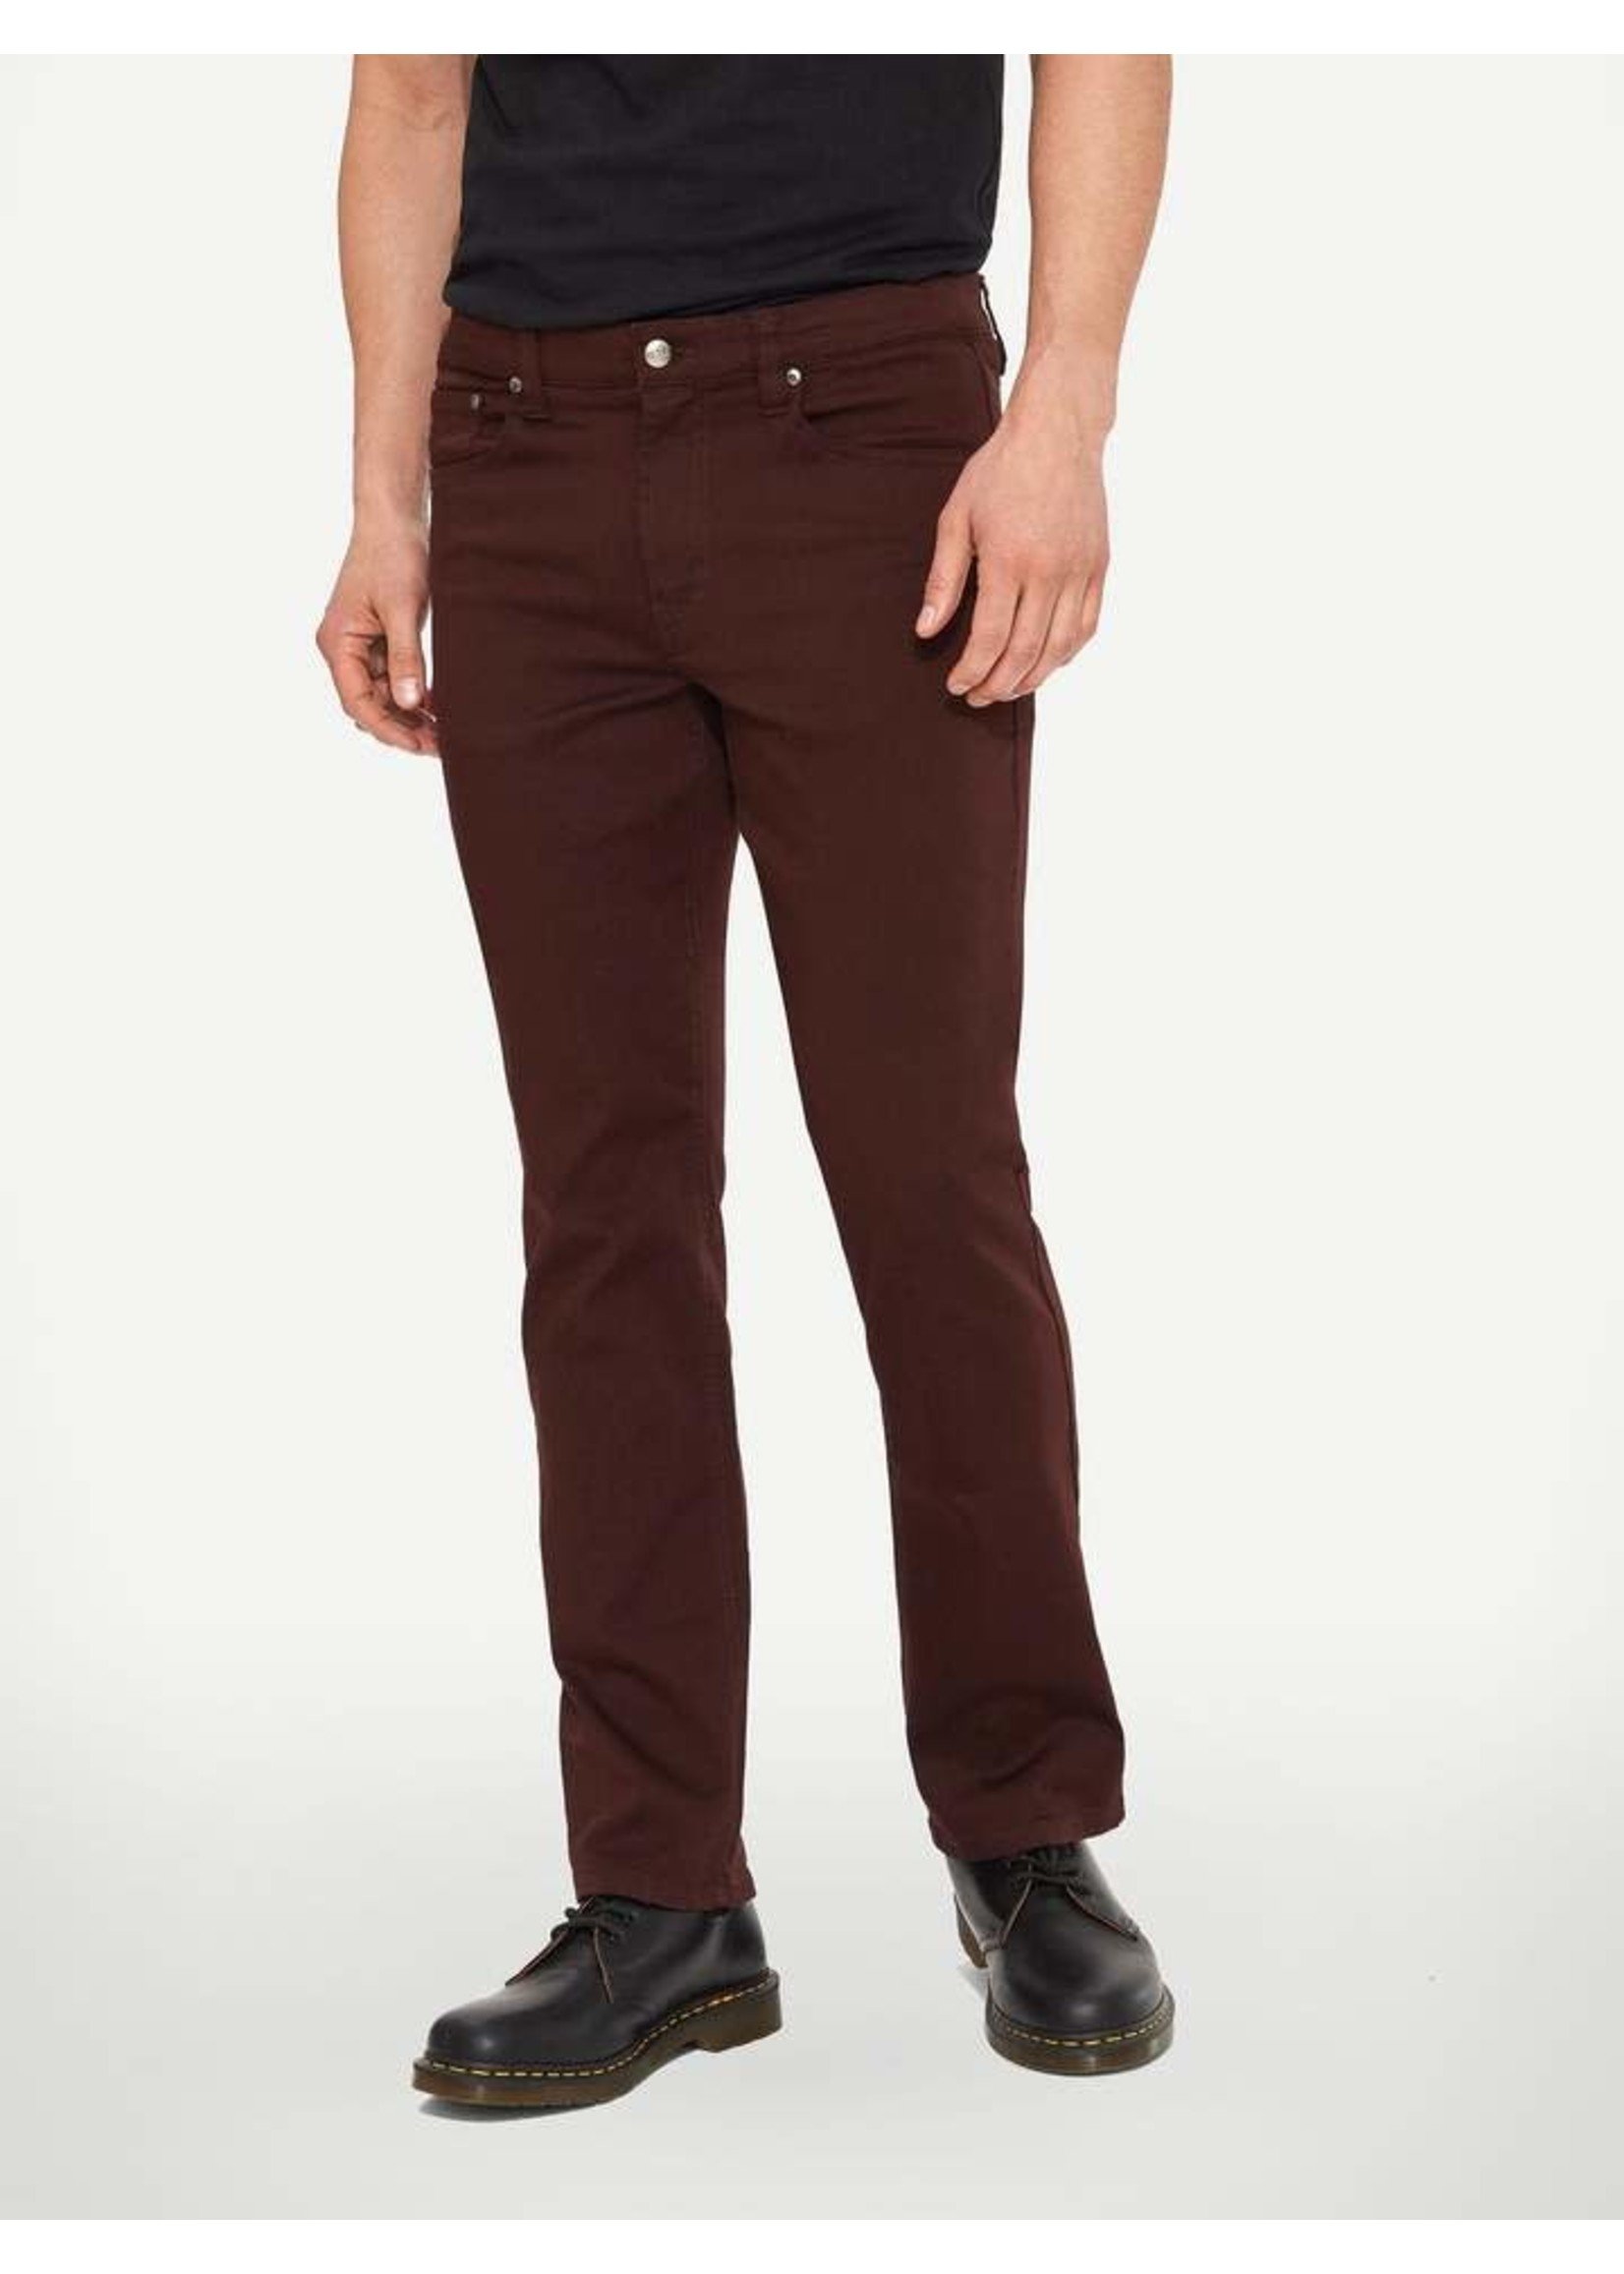 Lois Jeans Canada The "Brad Slim 6240-07" by Lois Jeans